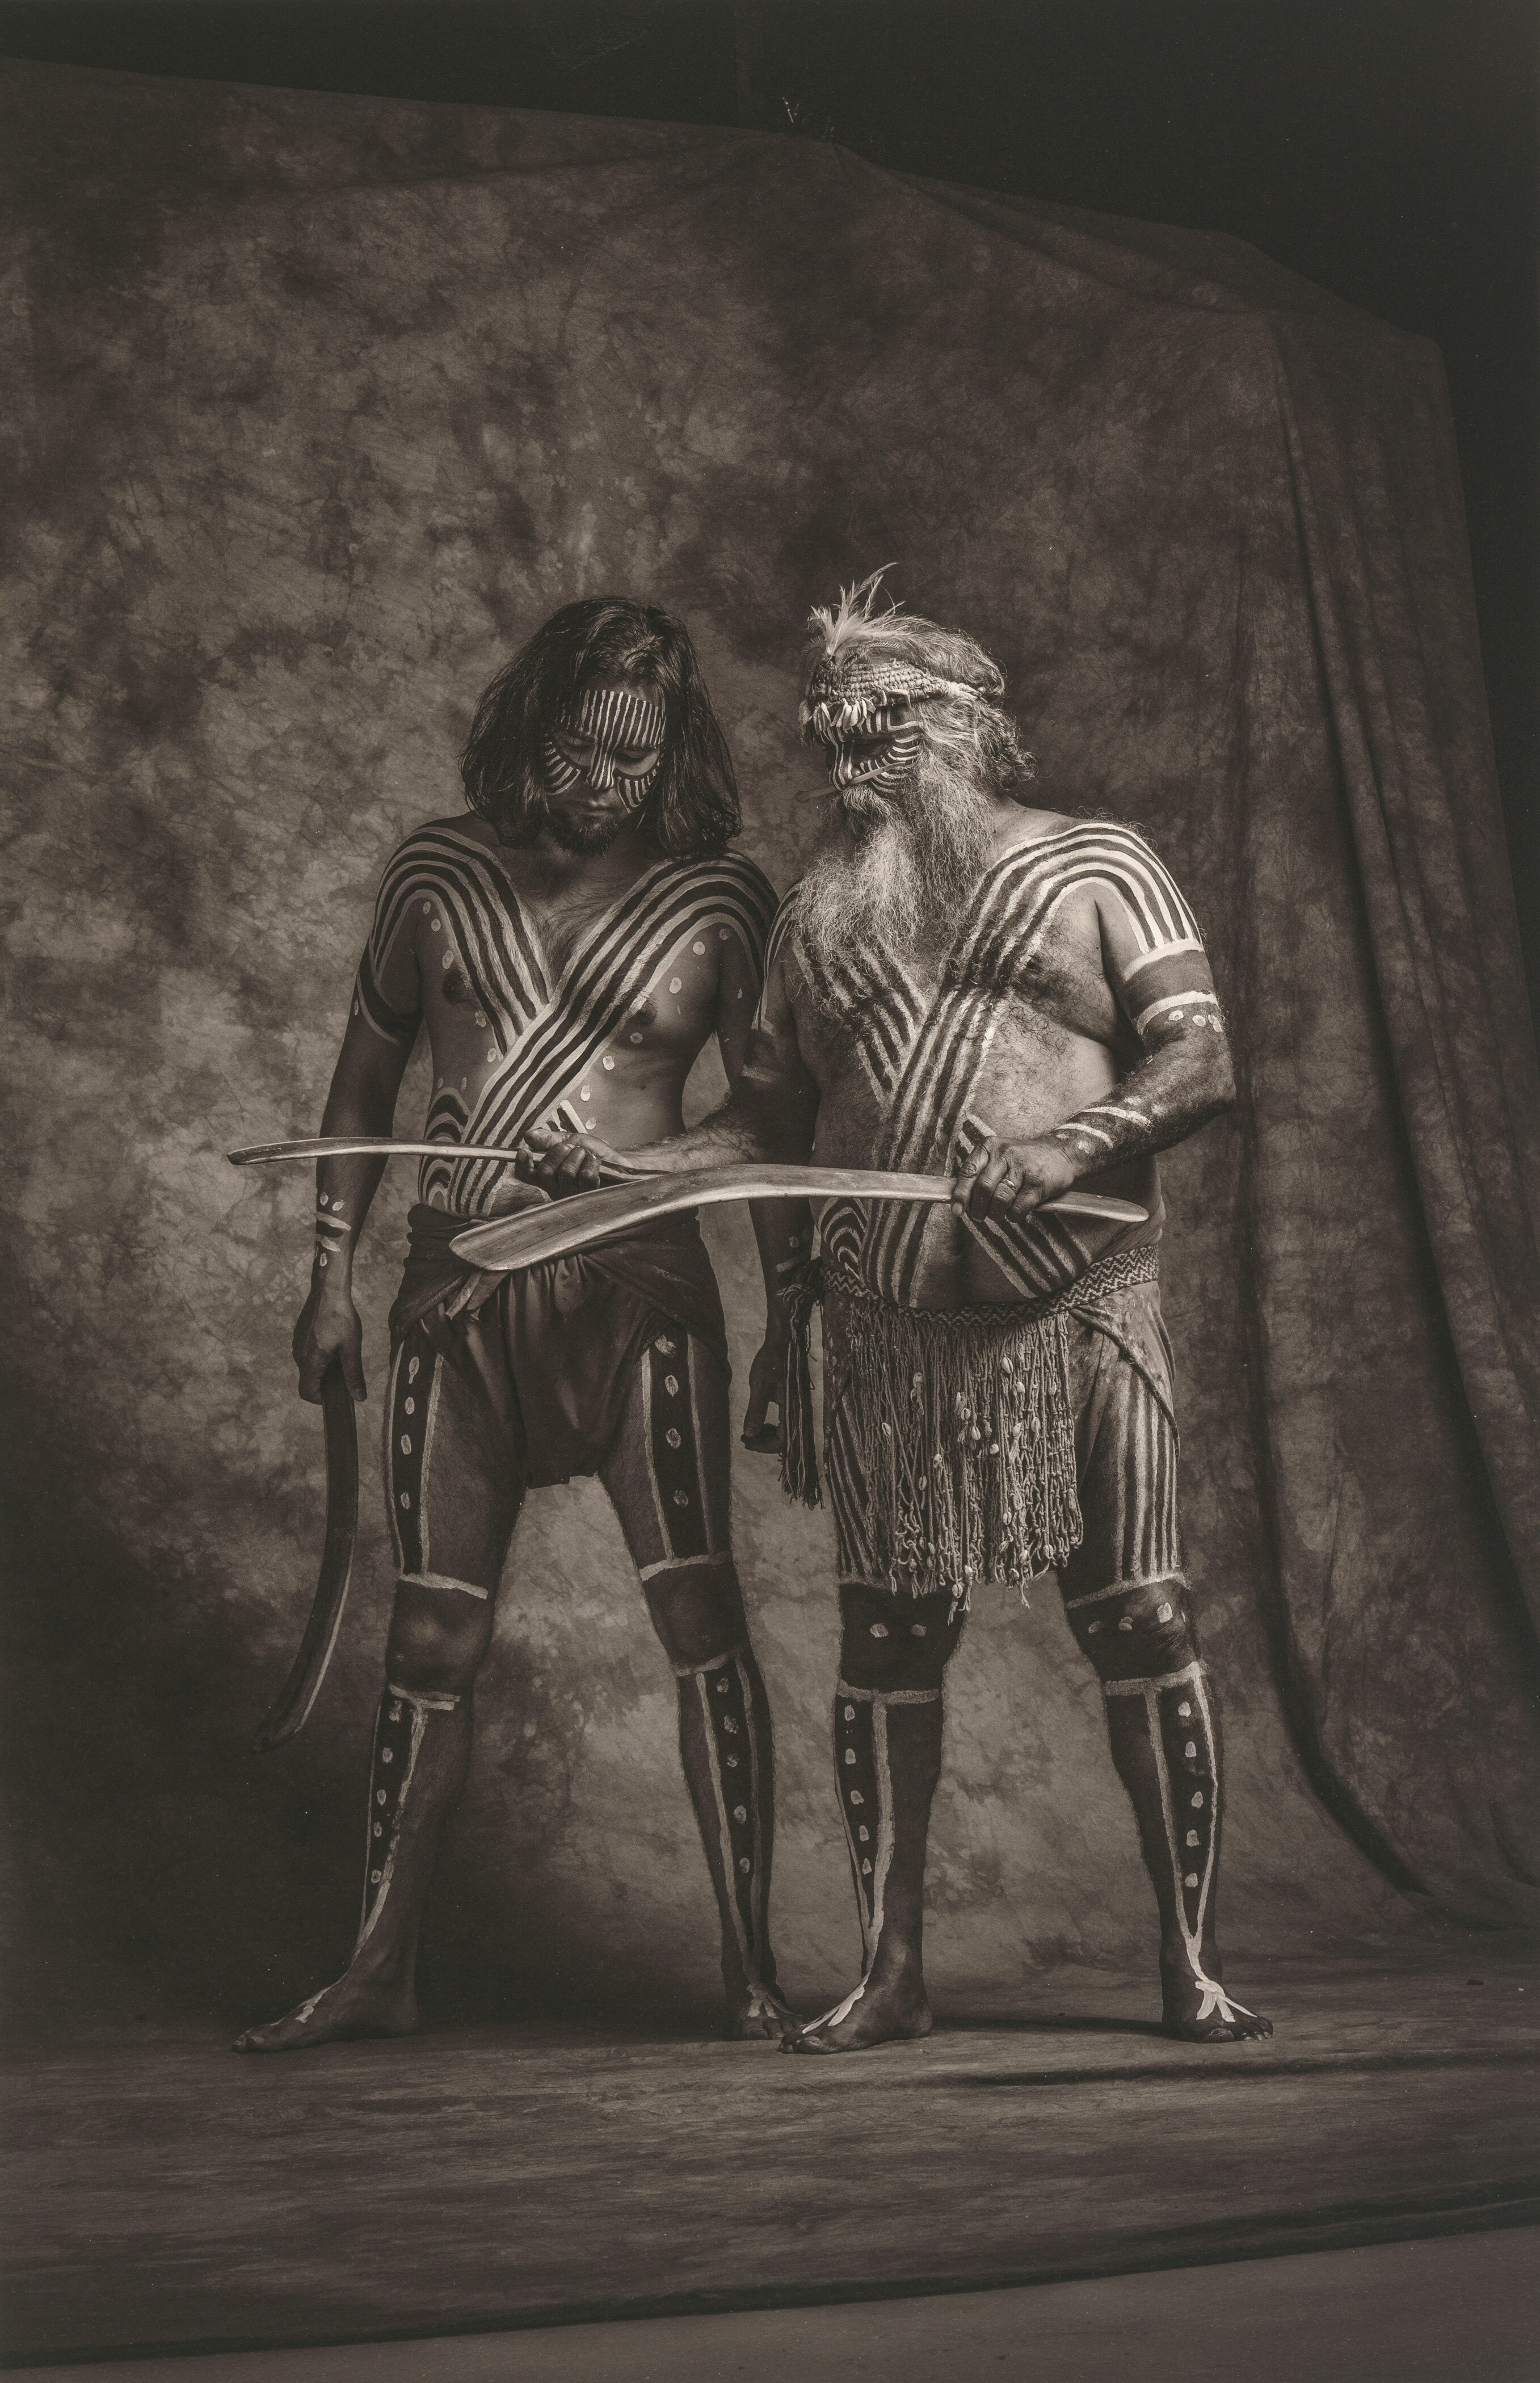 Sepia-tone photograph of young and older Ngarrindjeri men painted-up and dressed for ceremony, against a dropcloth.